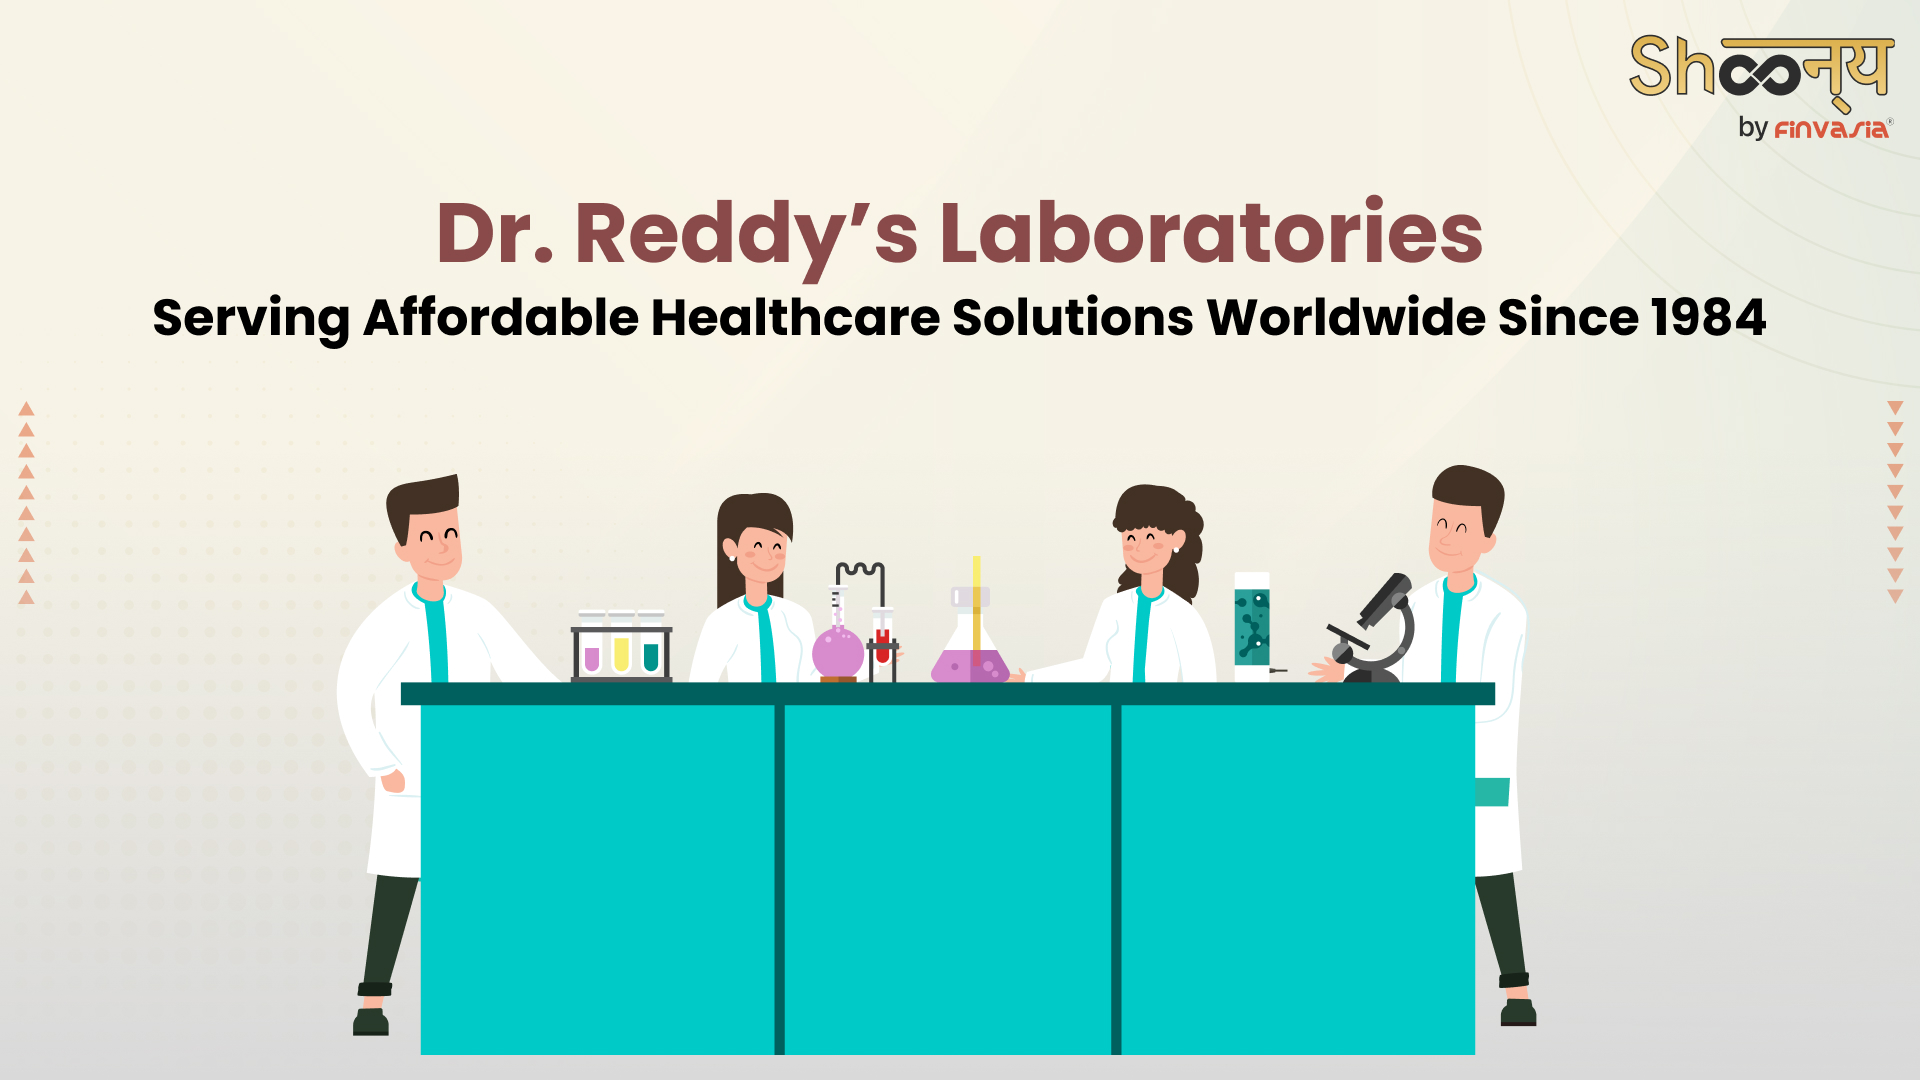 Dr. Reddy's Laboratories History| Founder and Famous Products